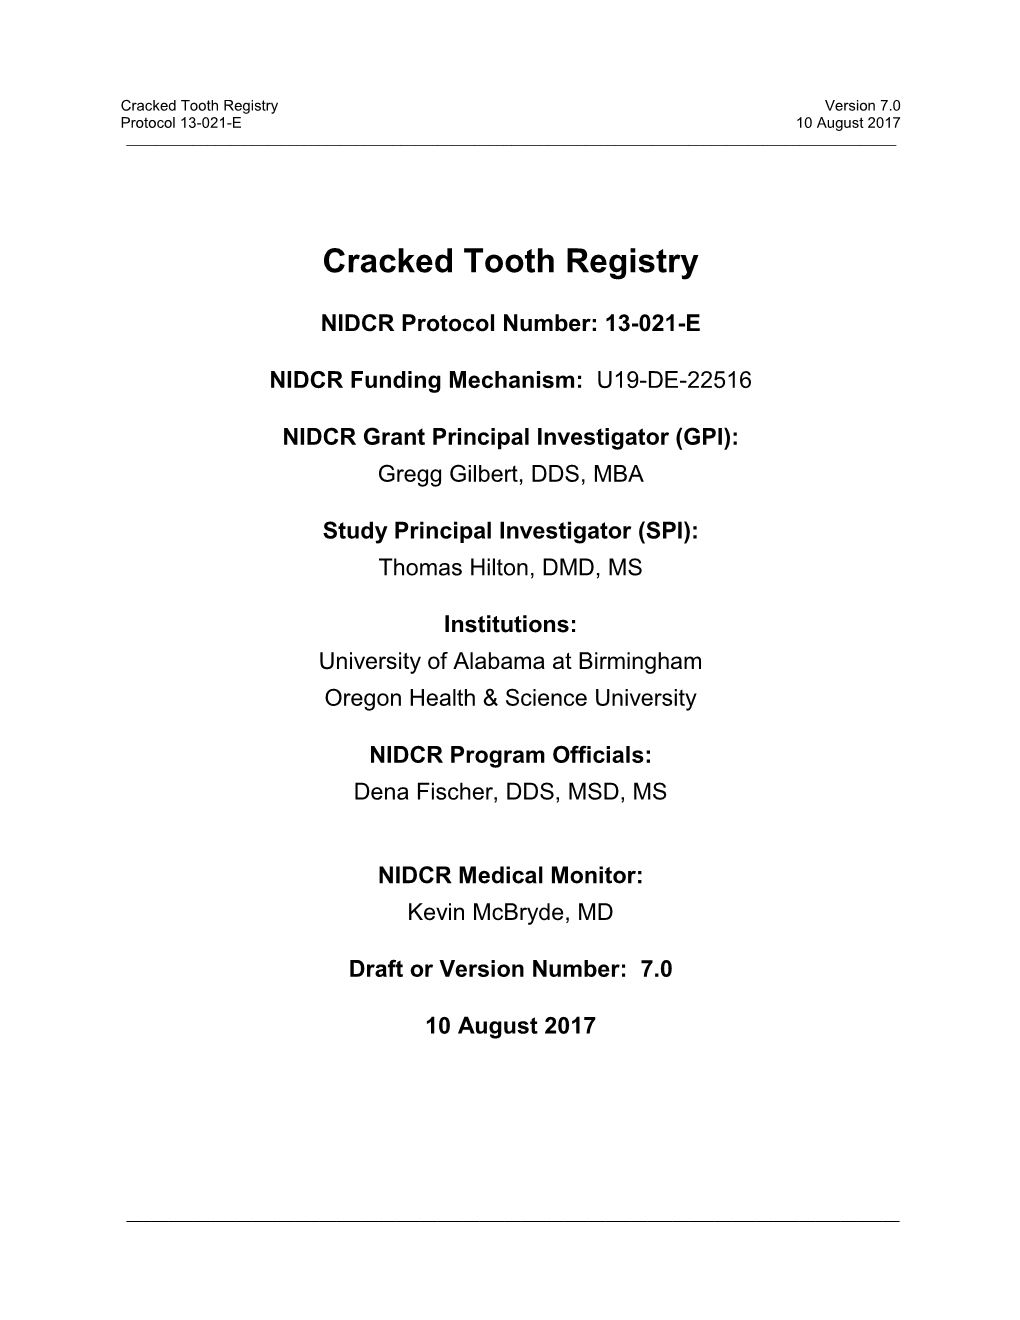 Cracked Tooth Study Protocol